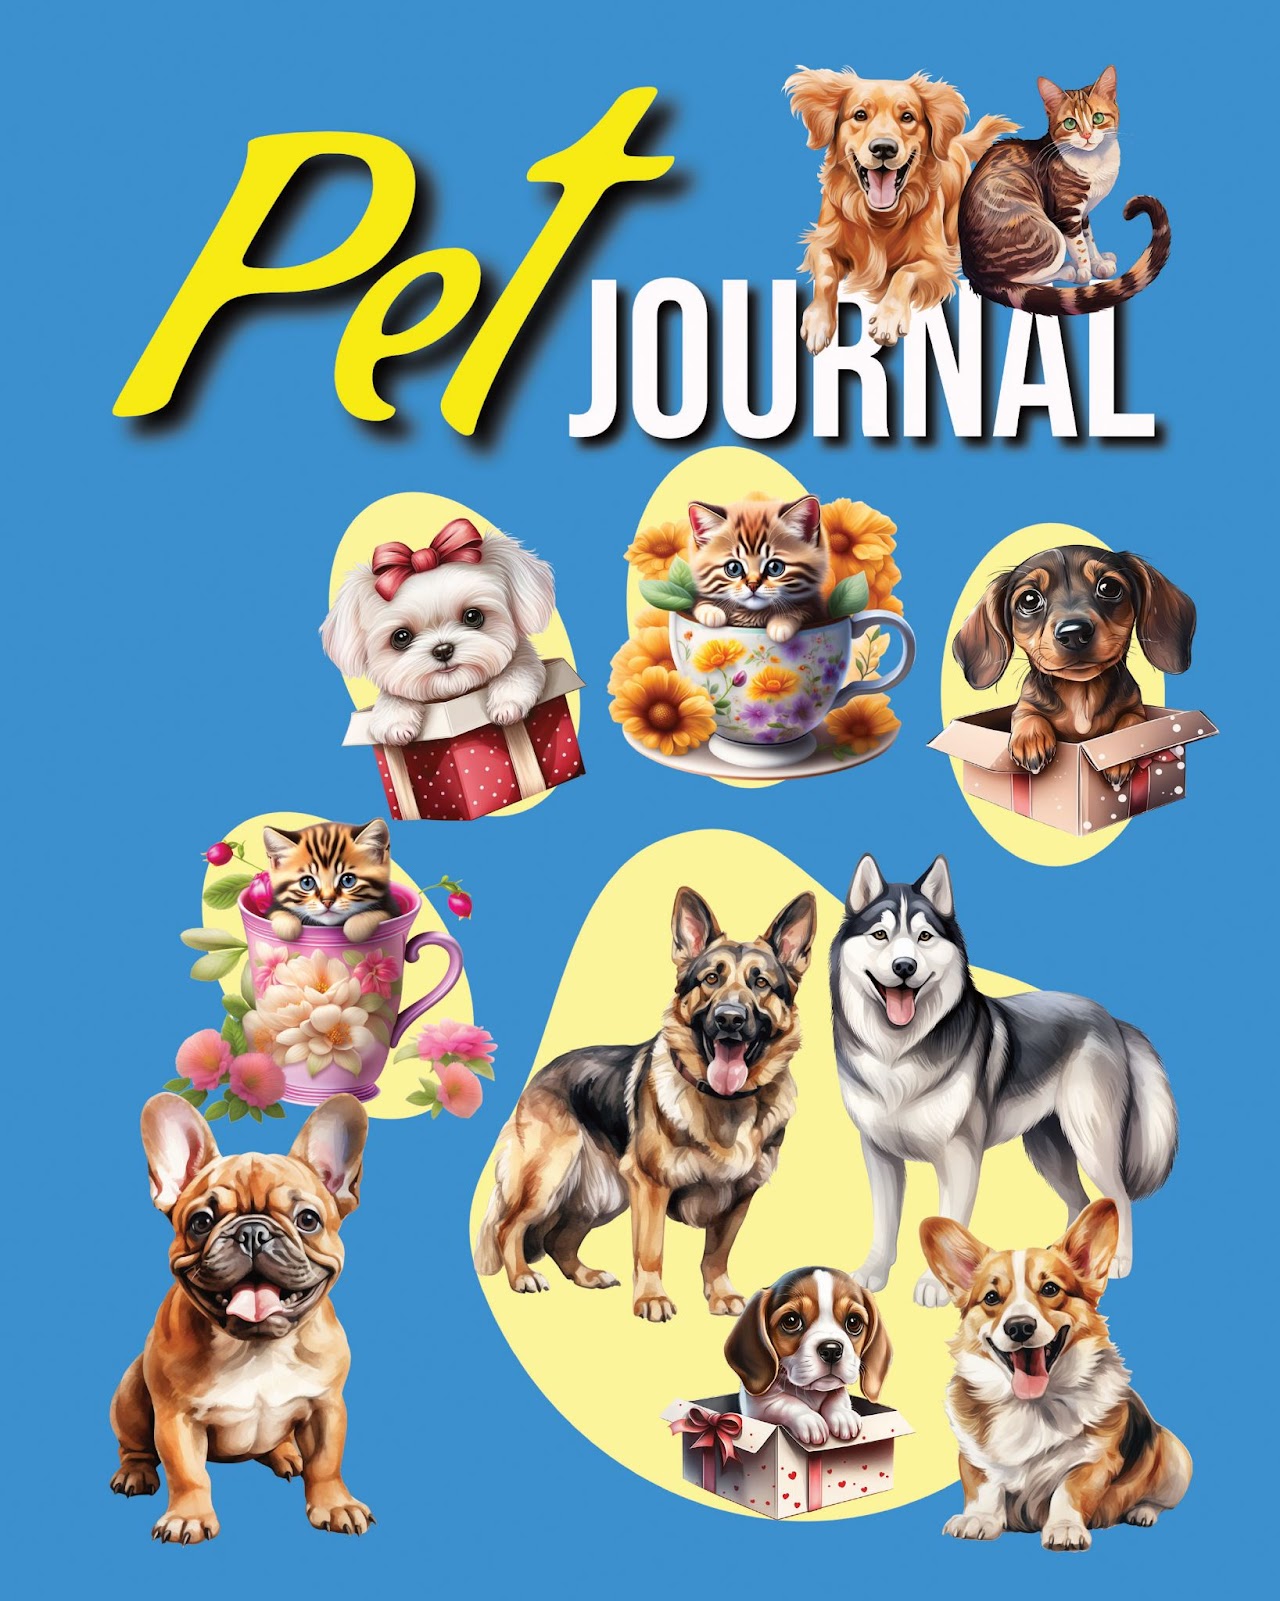 Pet parents can take better care of their pets with the help of a journal by their side.